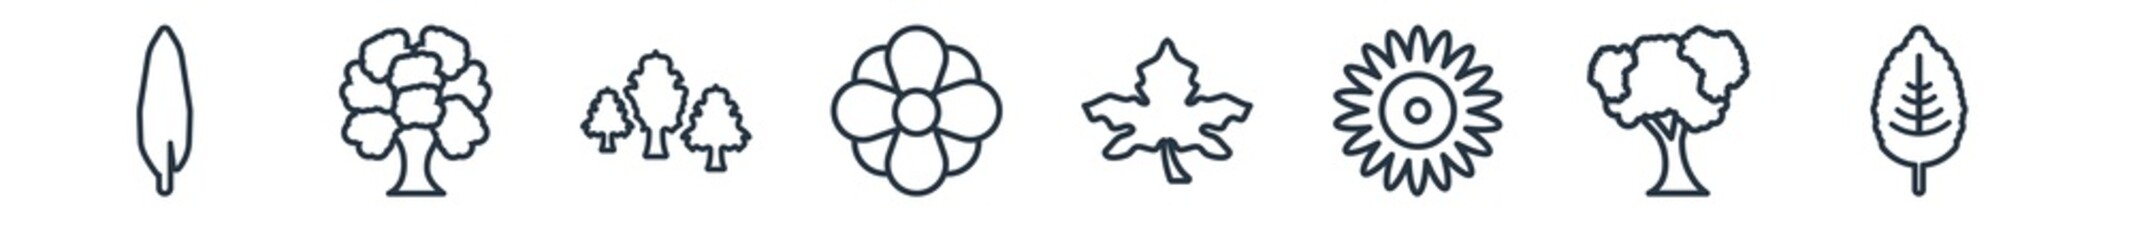 linear set of nature outline icons. line vector icons such as willow leaf, chestnut oak tree, silver maple tree, essence, sycamore tree, plum leaf vector illustration.